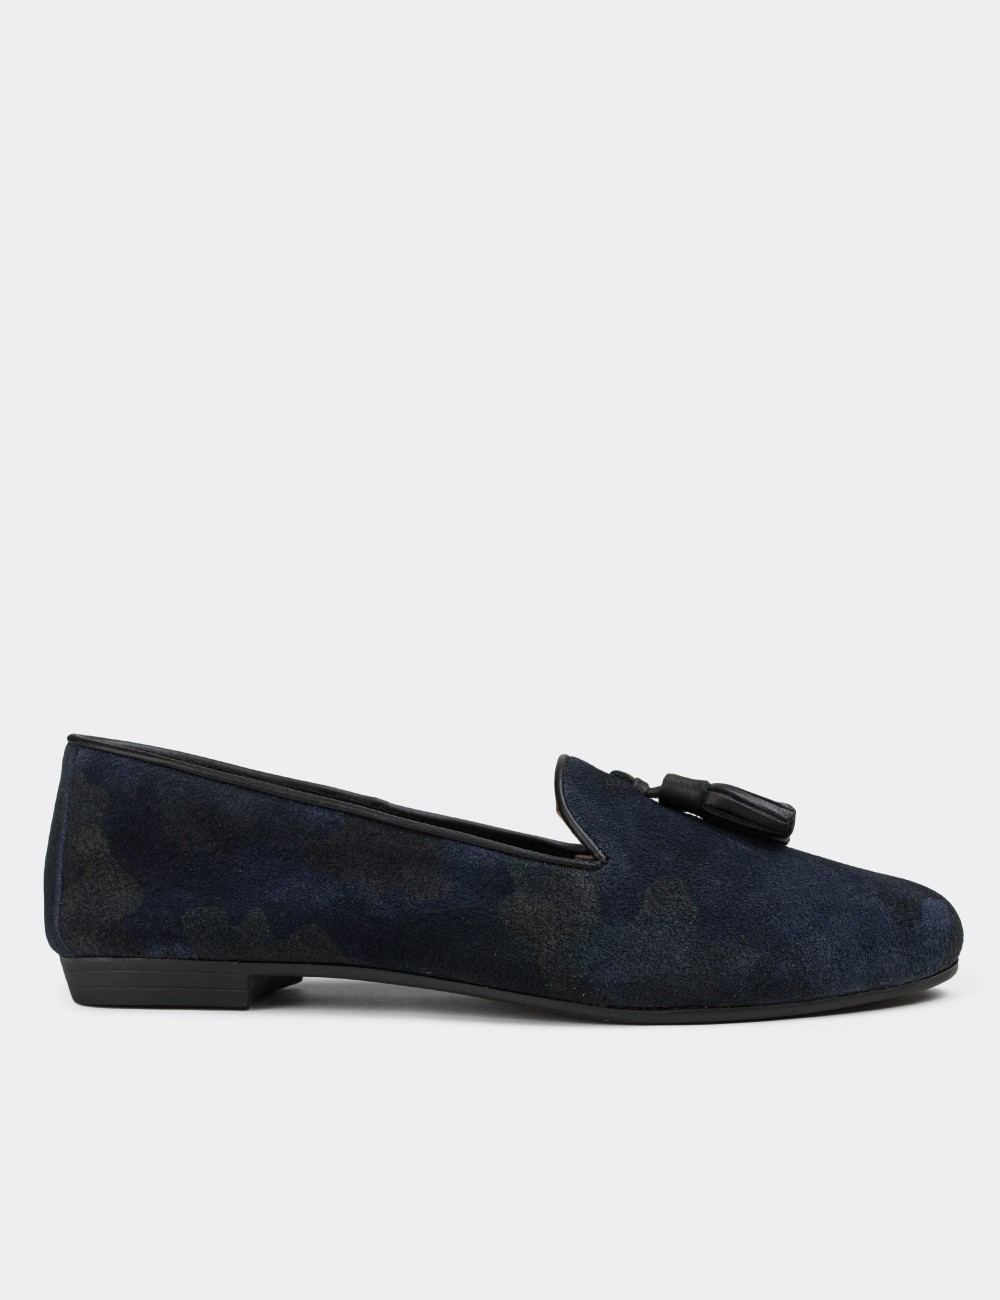 Navy Suede Leather Loafers  - E3204ZLCVC01